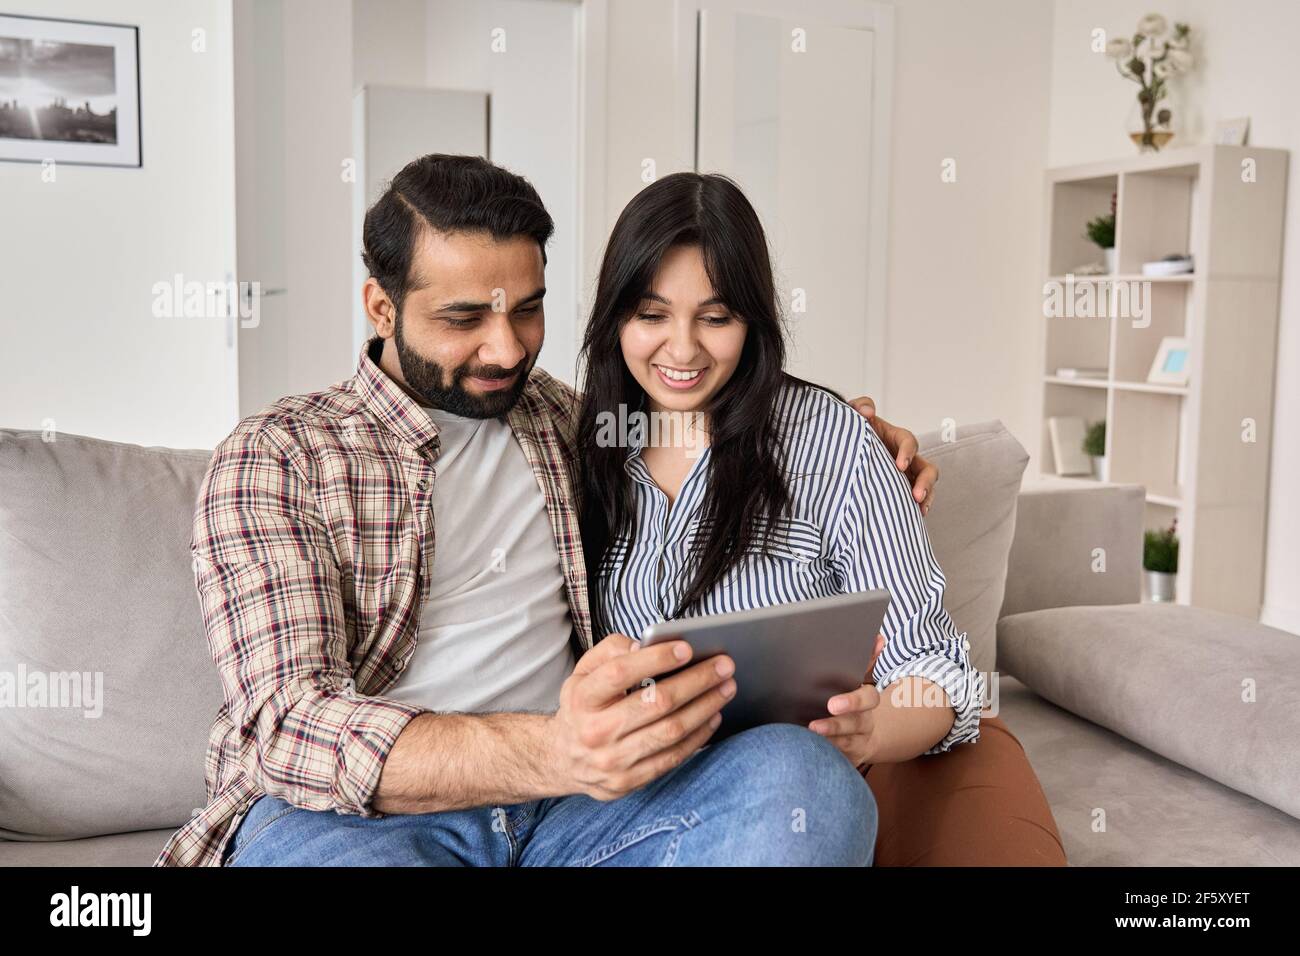 Happy indian family couple using digital tablet computer at home. Stock Photo